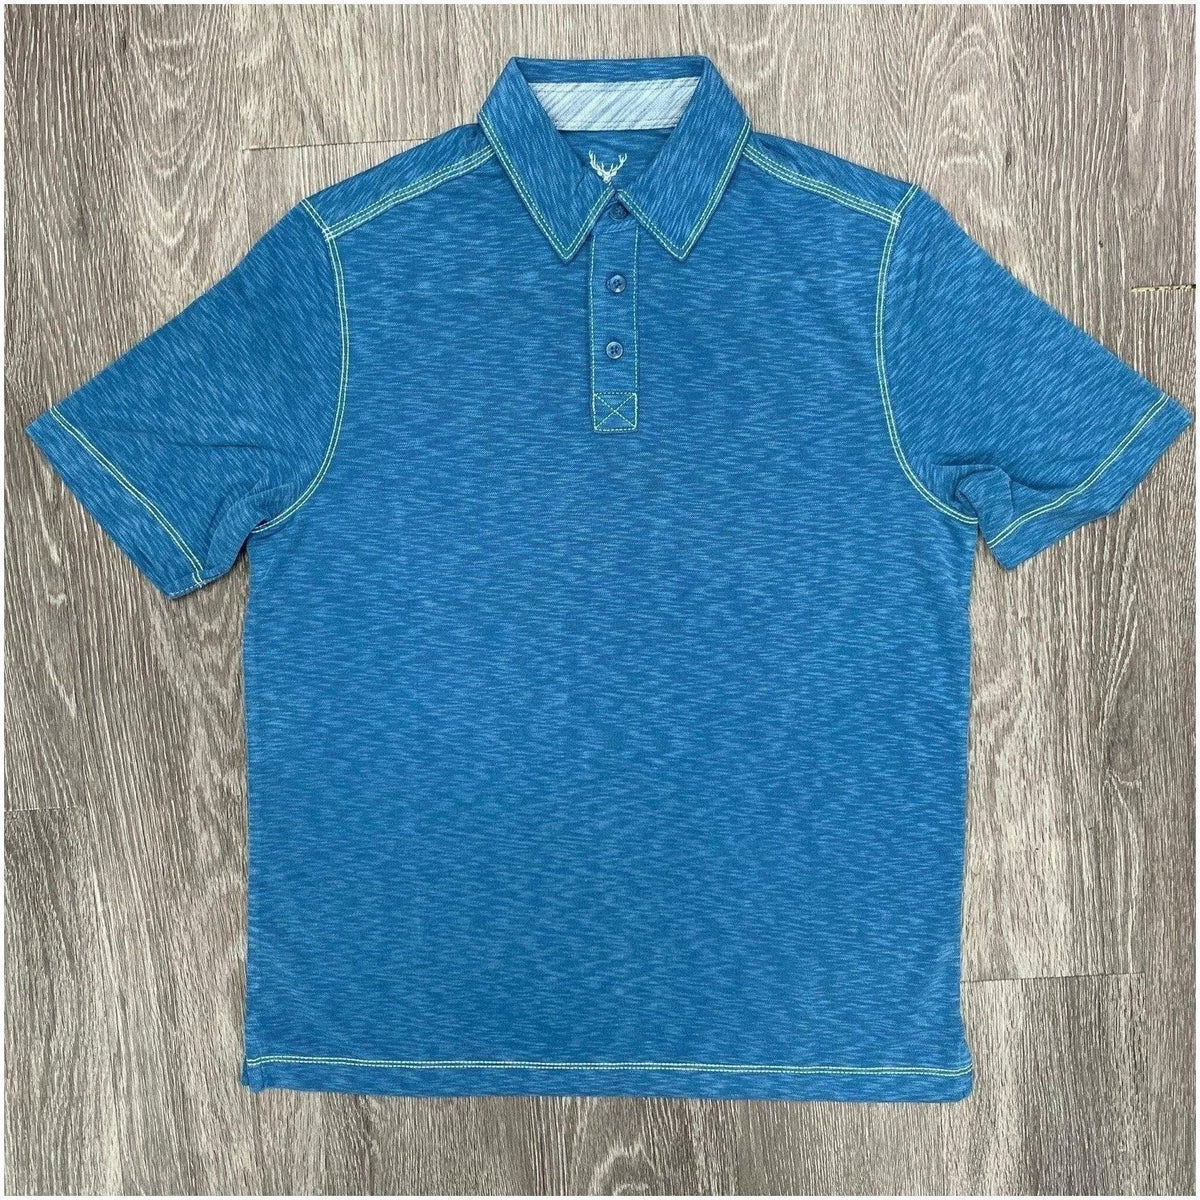 NICOBY: Knit Short Sleeve Polo | Guys and Co.